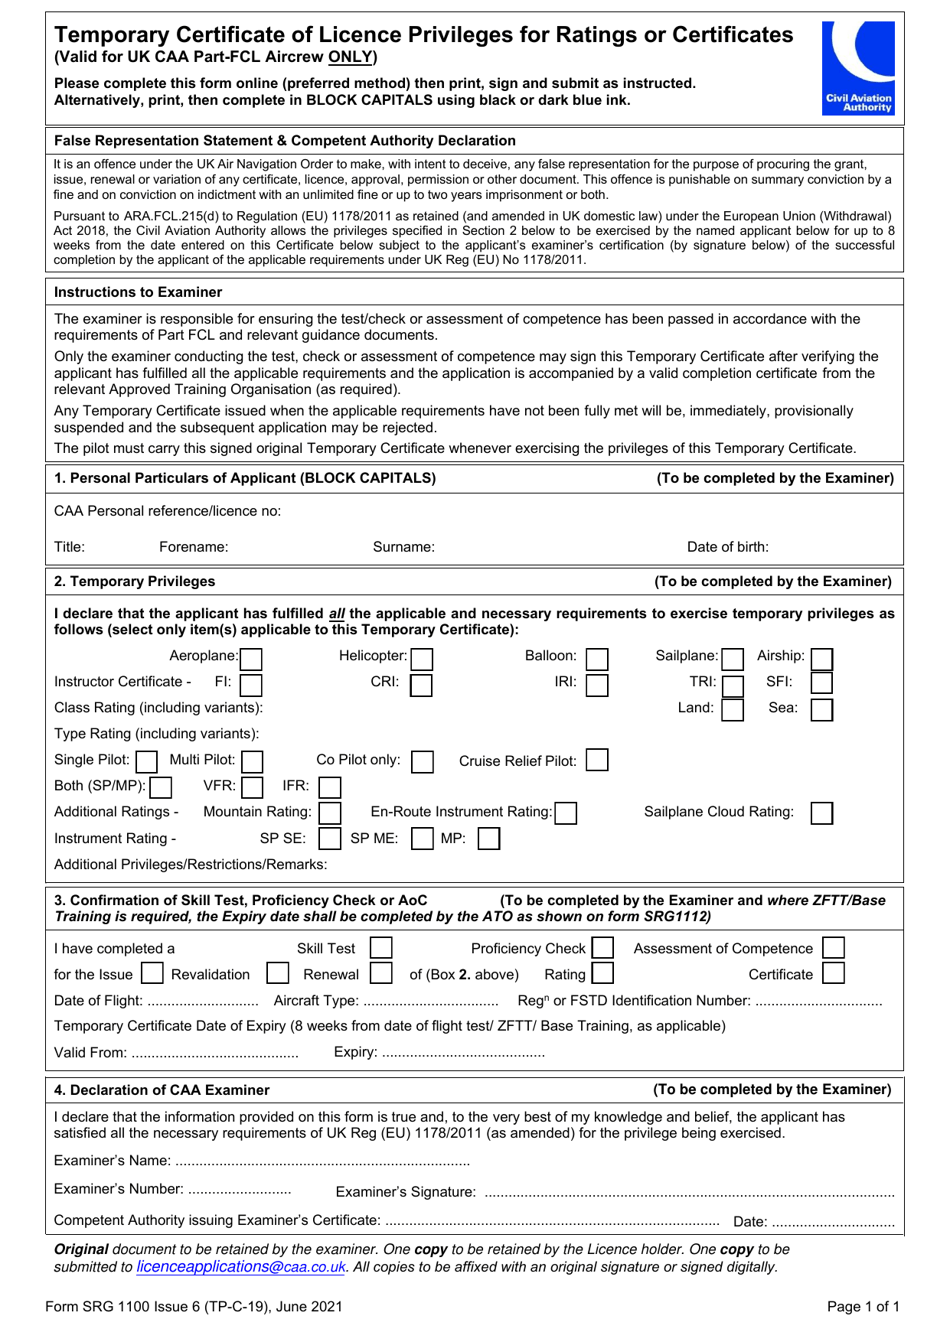 Form SRG1100 Temporary Certificate of Licence Privileges for Ratings or Certificates (Valid for UK Caa Part-Fcl Aircrew Only) - United Kingdom, Page 1